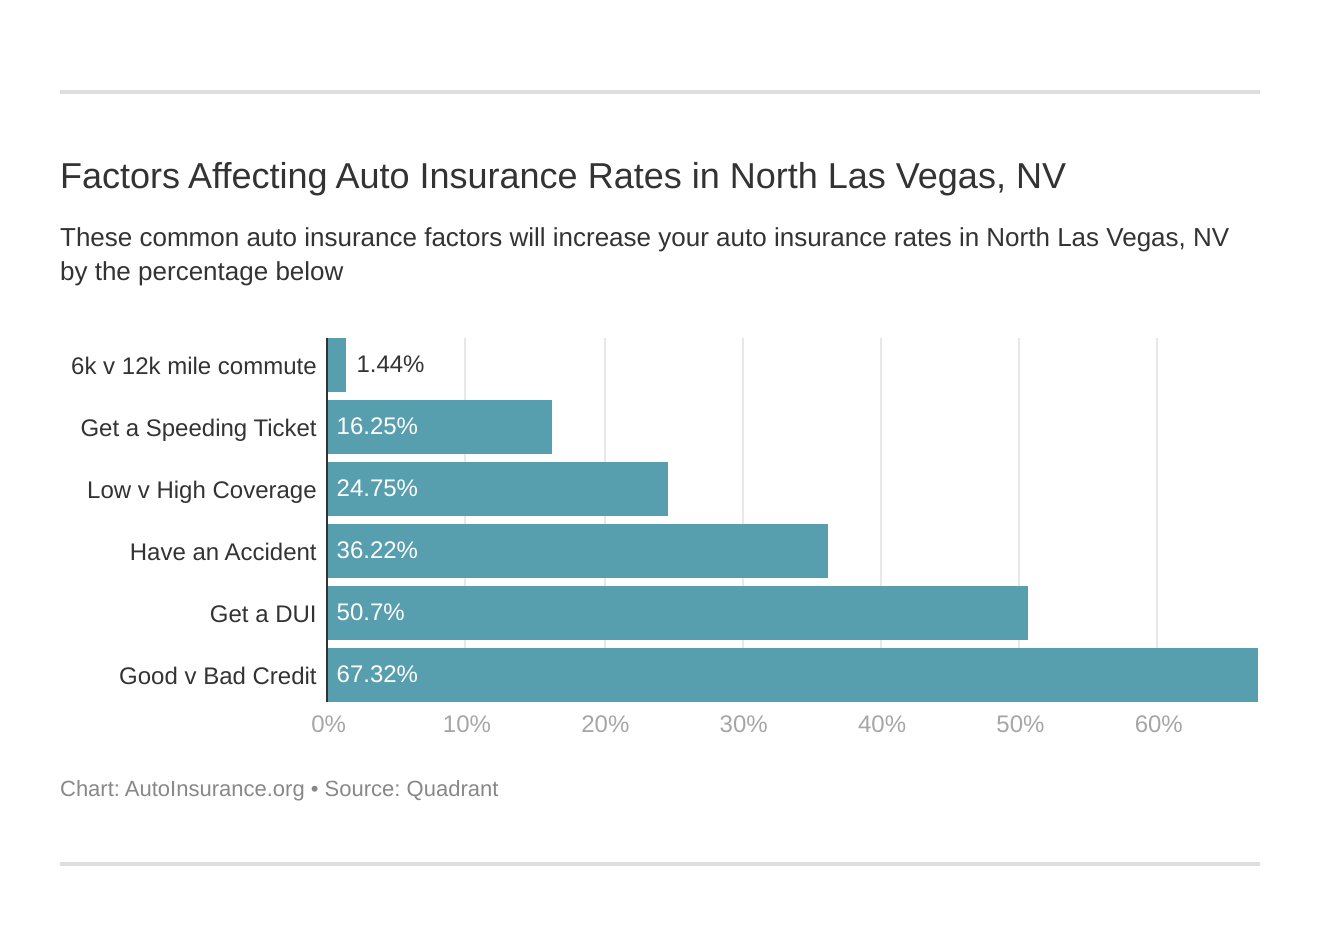 Factors Affecting Auto Insurance Rates in North Las Vegas, NV